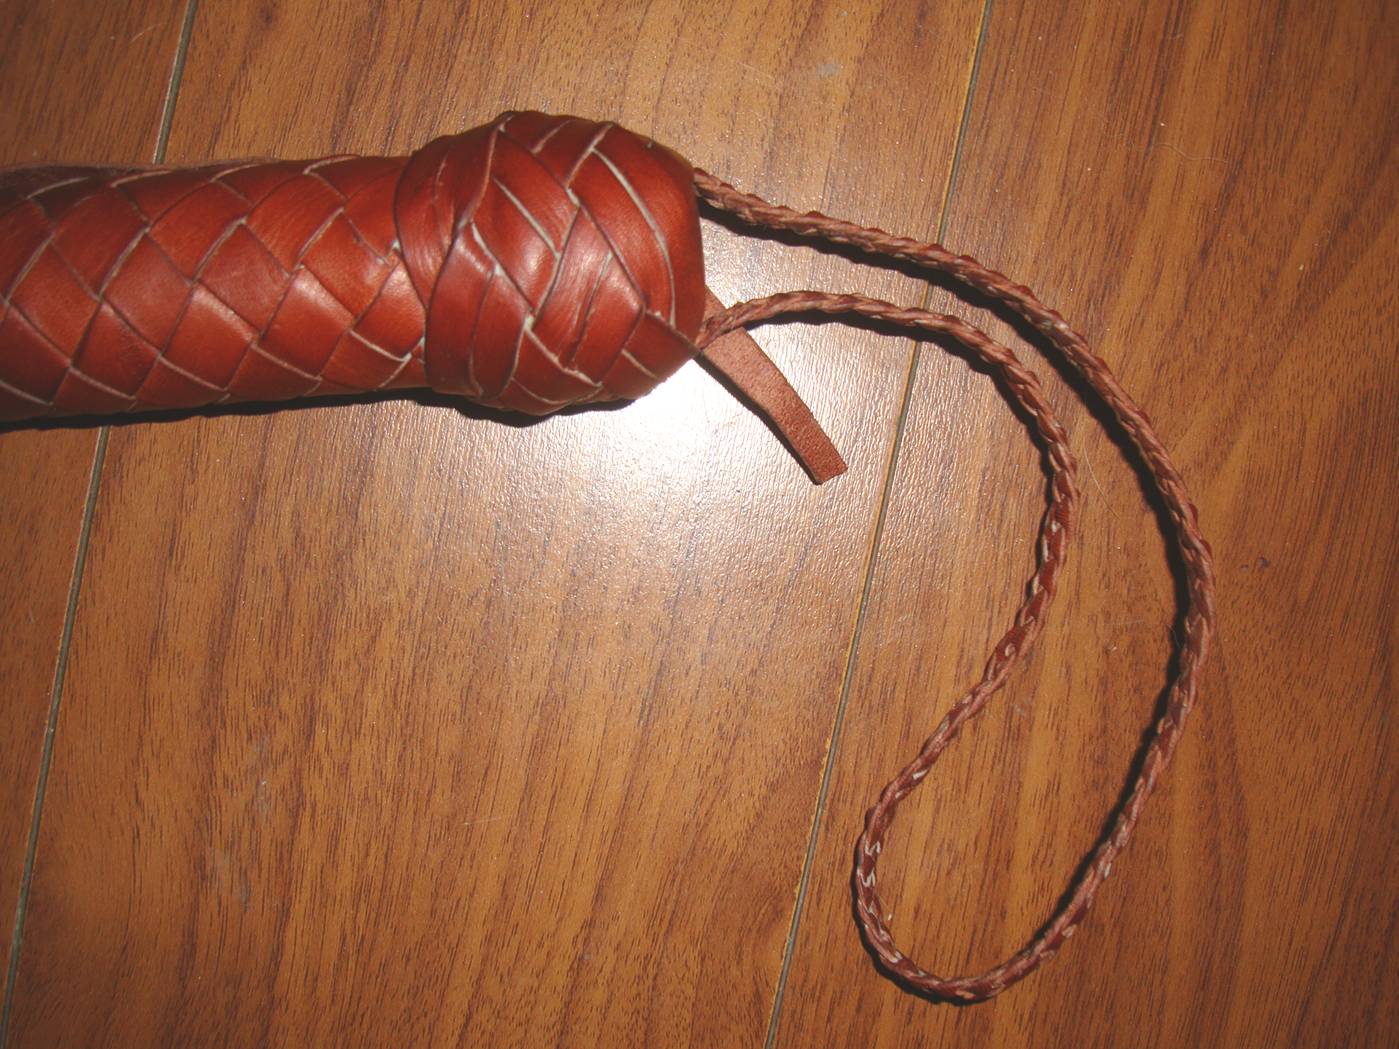 Picture:  The Turk's head knot on the butt of the new whip cost me many hours of effort.  Now I could tie it in ten minutes.